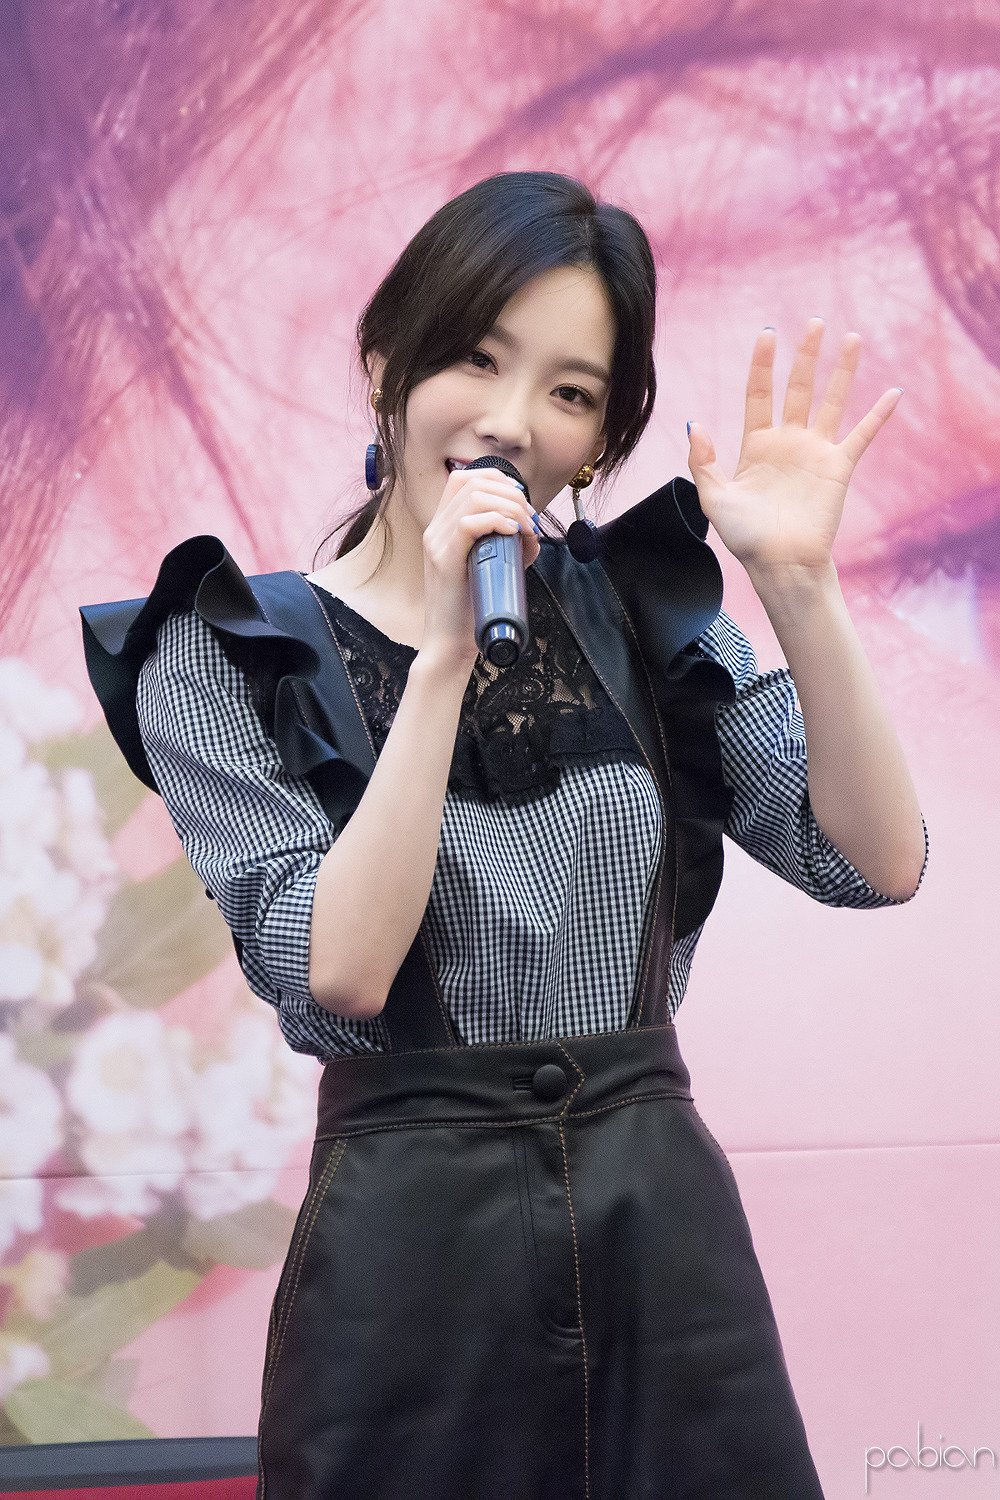 [PIC][16-04-2017]TaeYeon tham dự buổi Fansign cho “MY VOICE DELUXE EDITION” tại AK PLAZA vào chiều nay  - Page 4 254AC94C58F6ED47115AD8